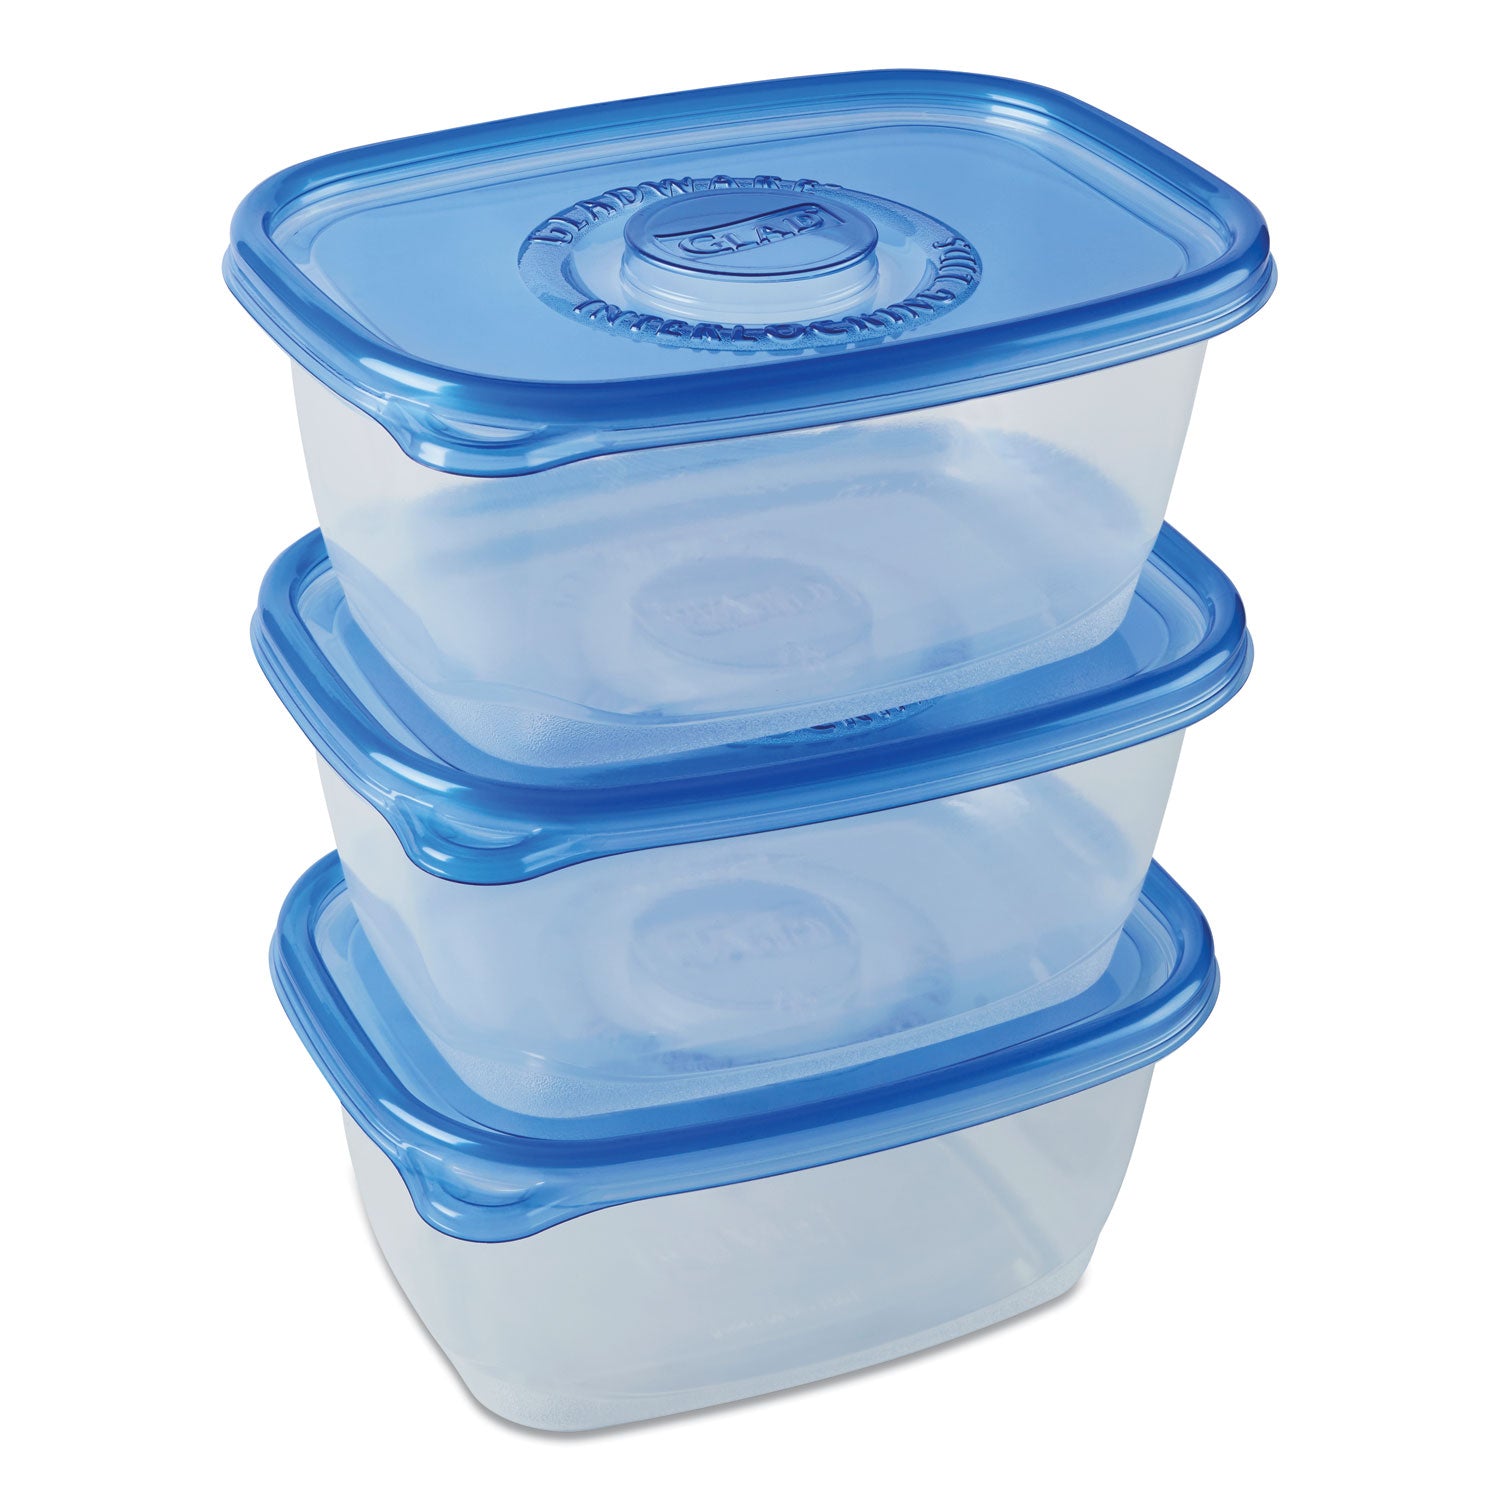 Deep Dish Food Storage Containers, 64 oz, Plastic, 3/Pack - 